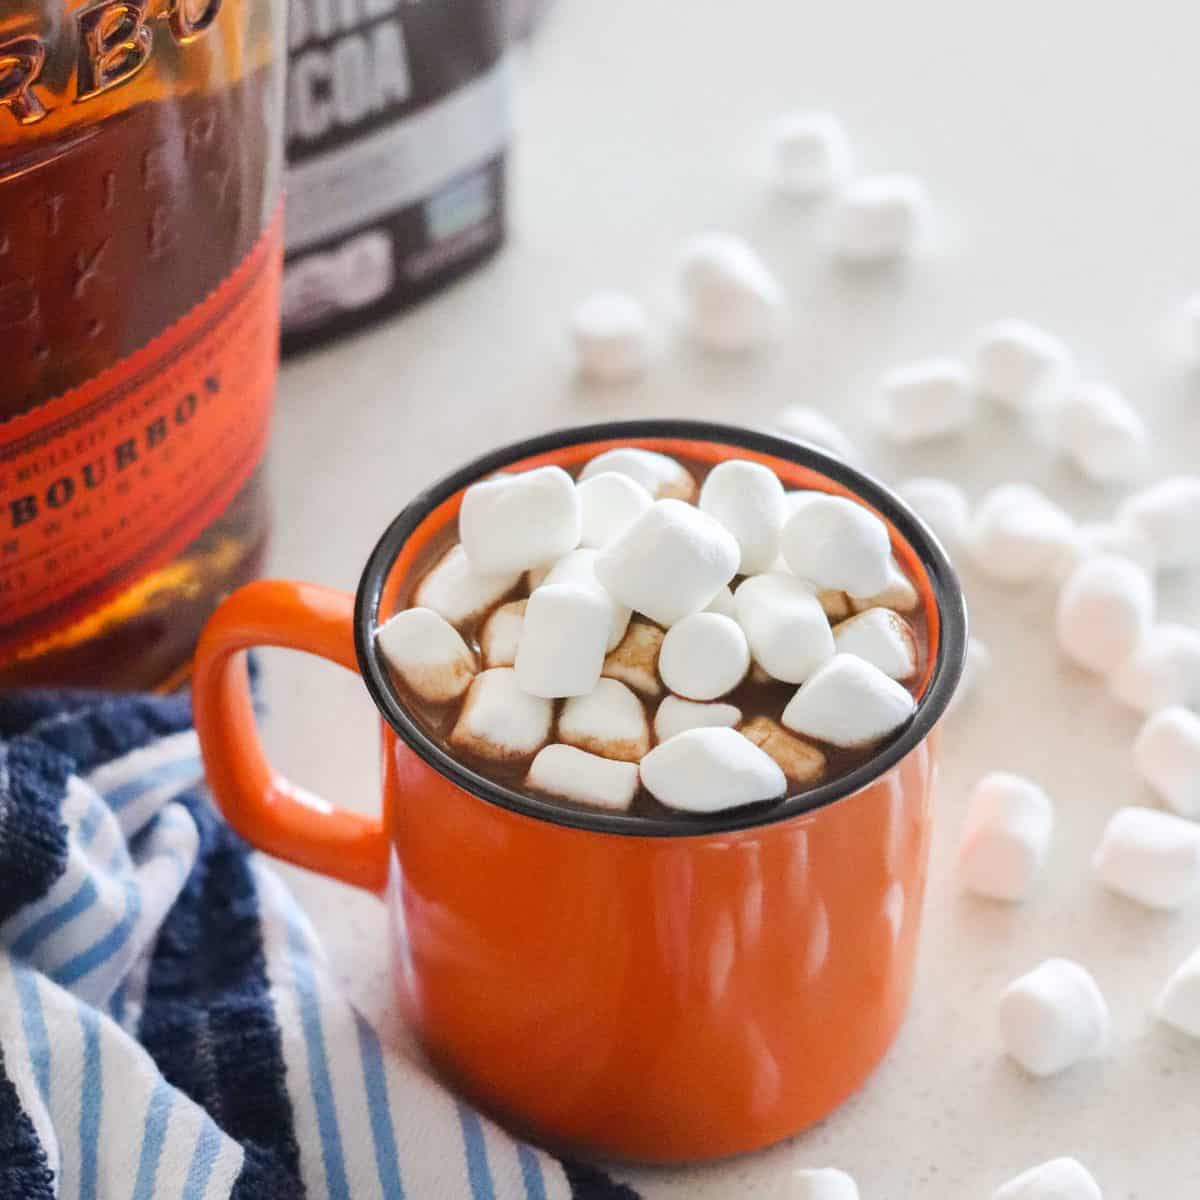 Bourbon Hot Chocolate: steps to make homemade spiked hot cocoa